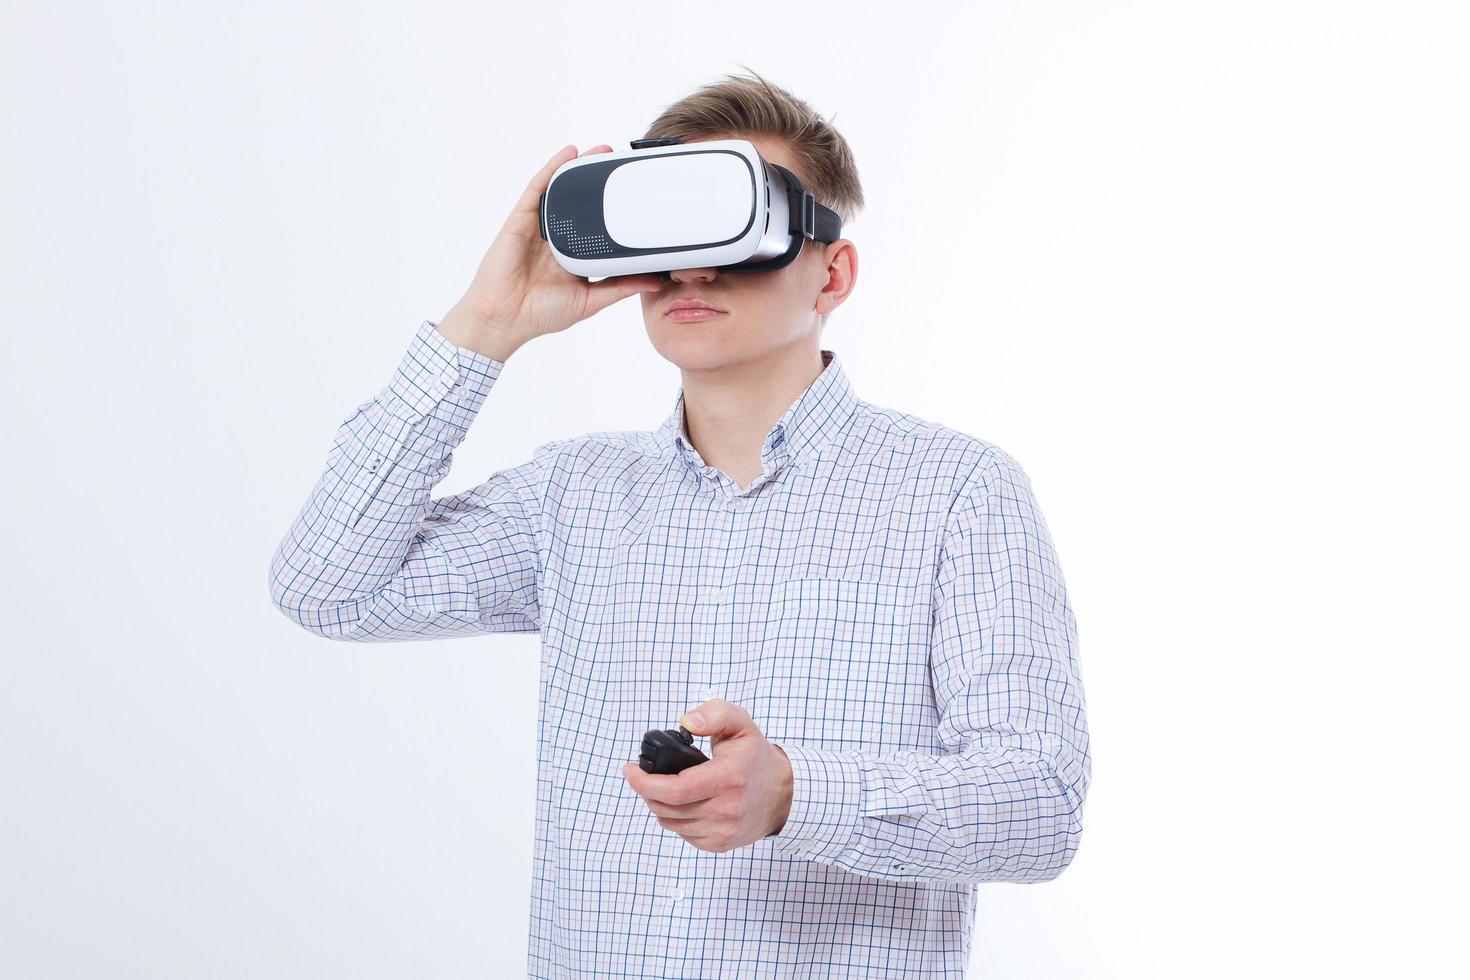 Young business man in vr glasses, goggles watching virtual reality isolated on white background. Copy space and mock up photo